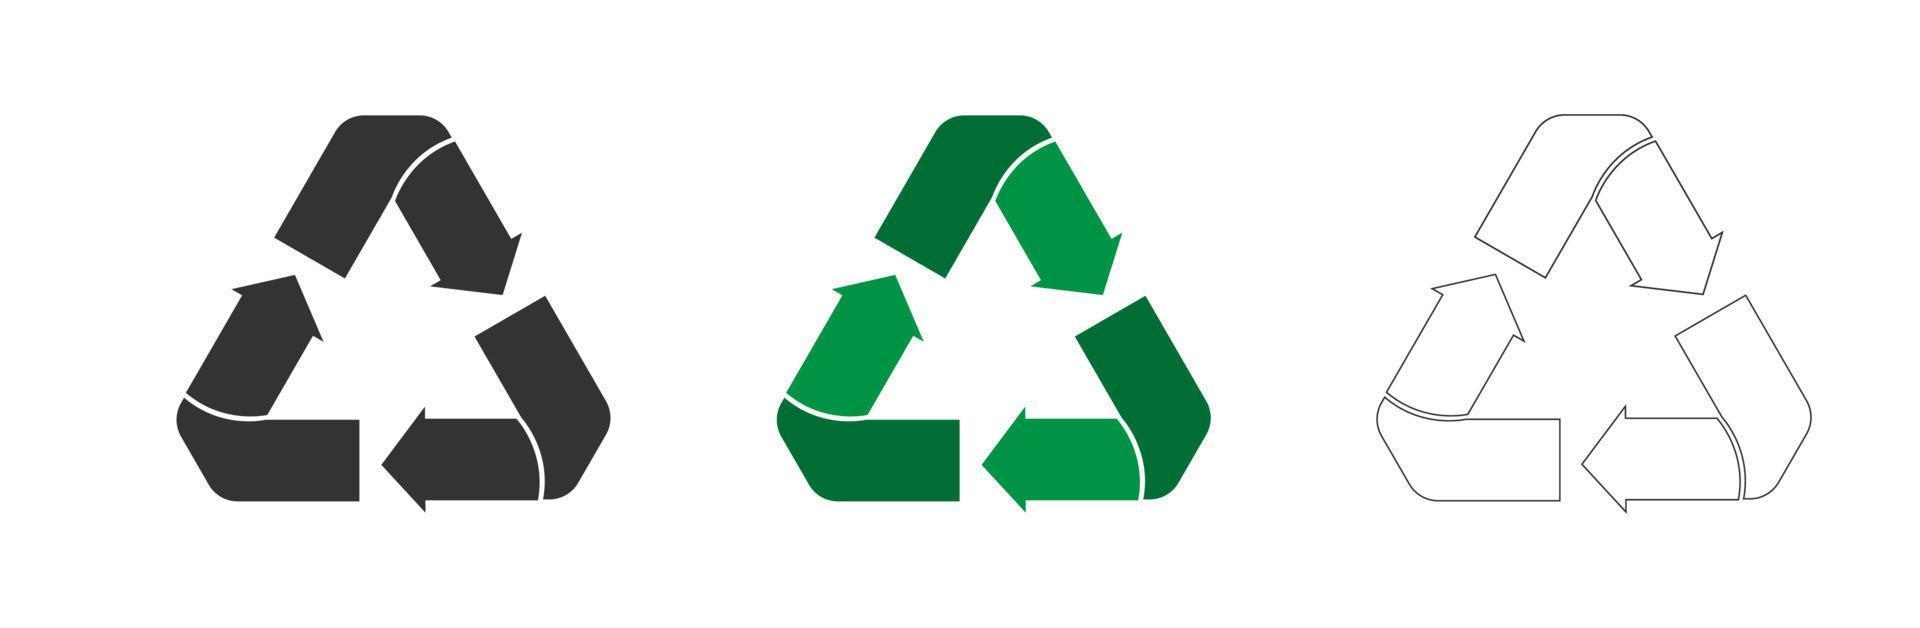 Set of recycling icons. Triangle Recycling Sign Symbol vector